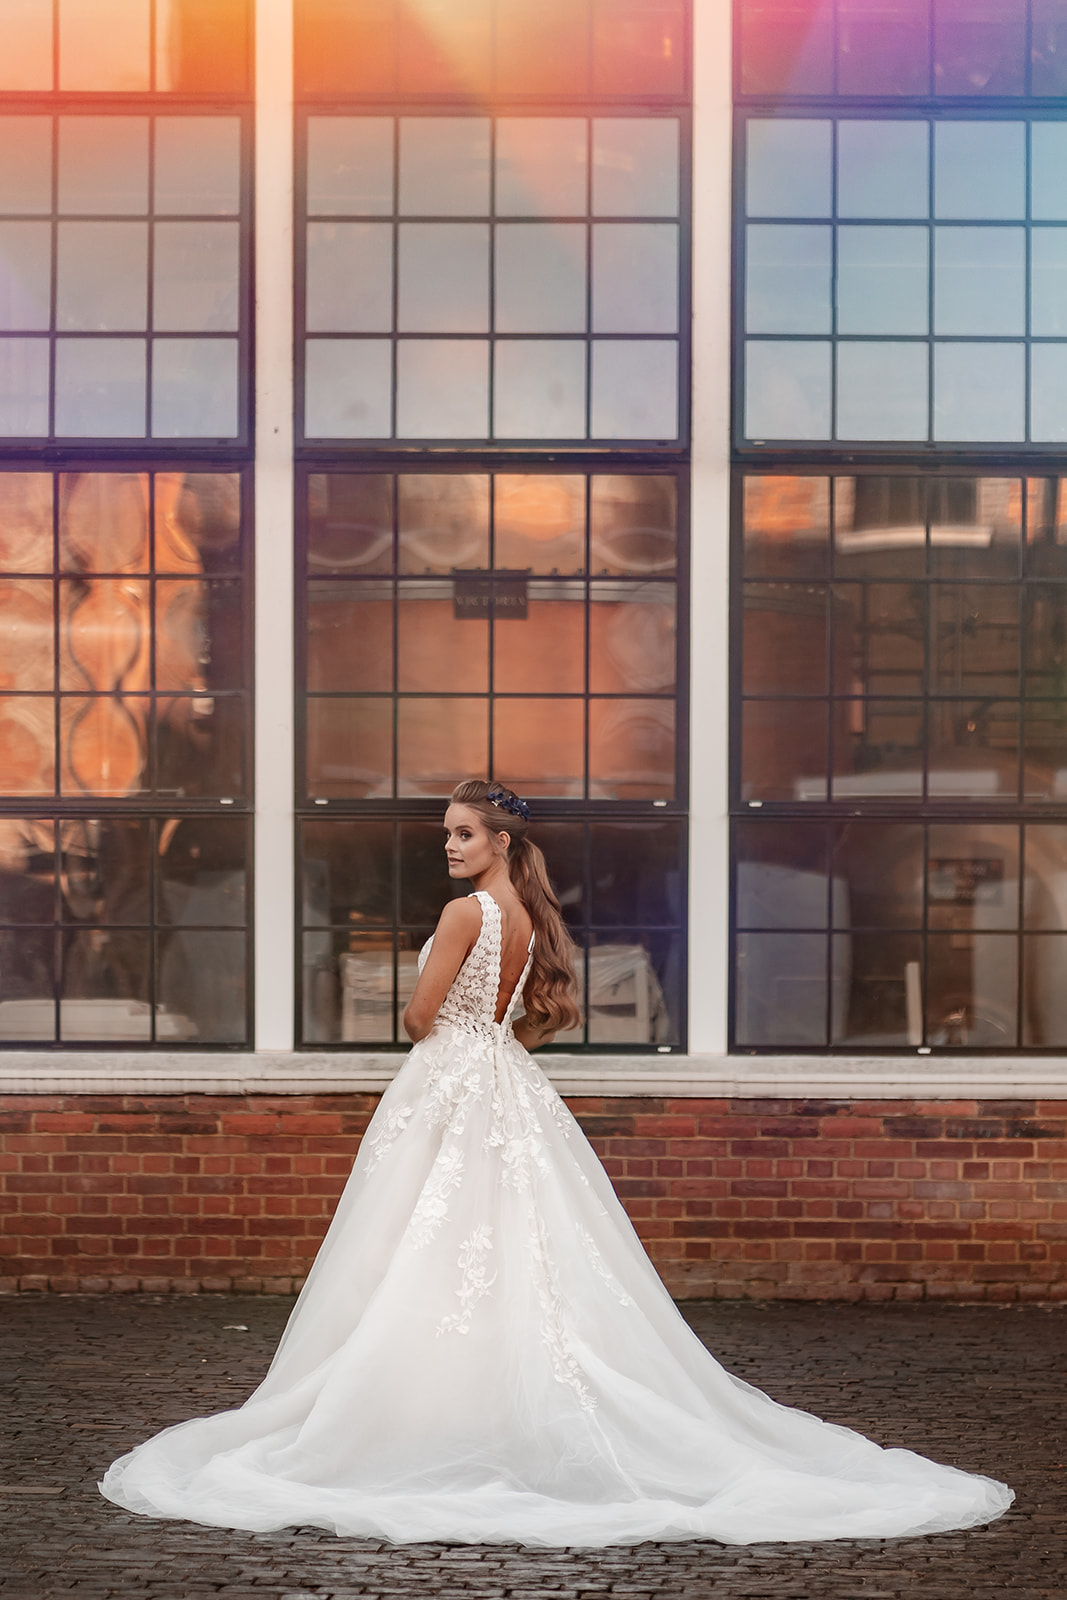 Bridal model in a white princess dress stands in front of tall industrial windows at the Bombay Sapphire Distillery. 